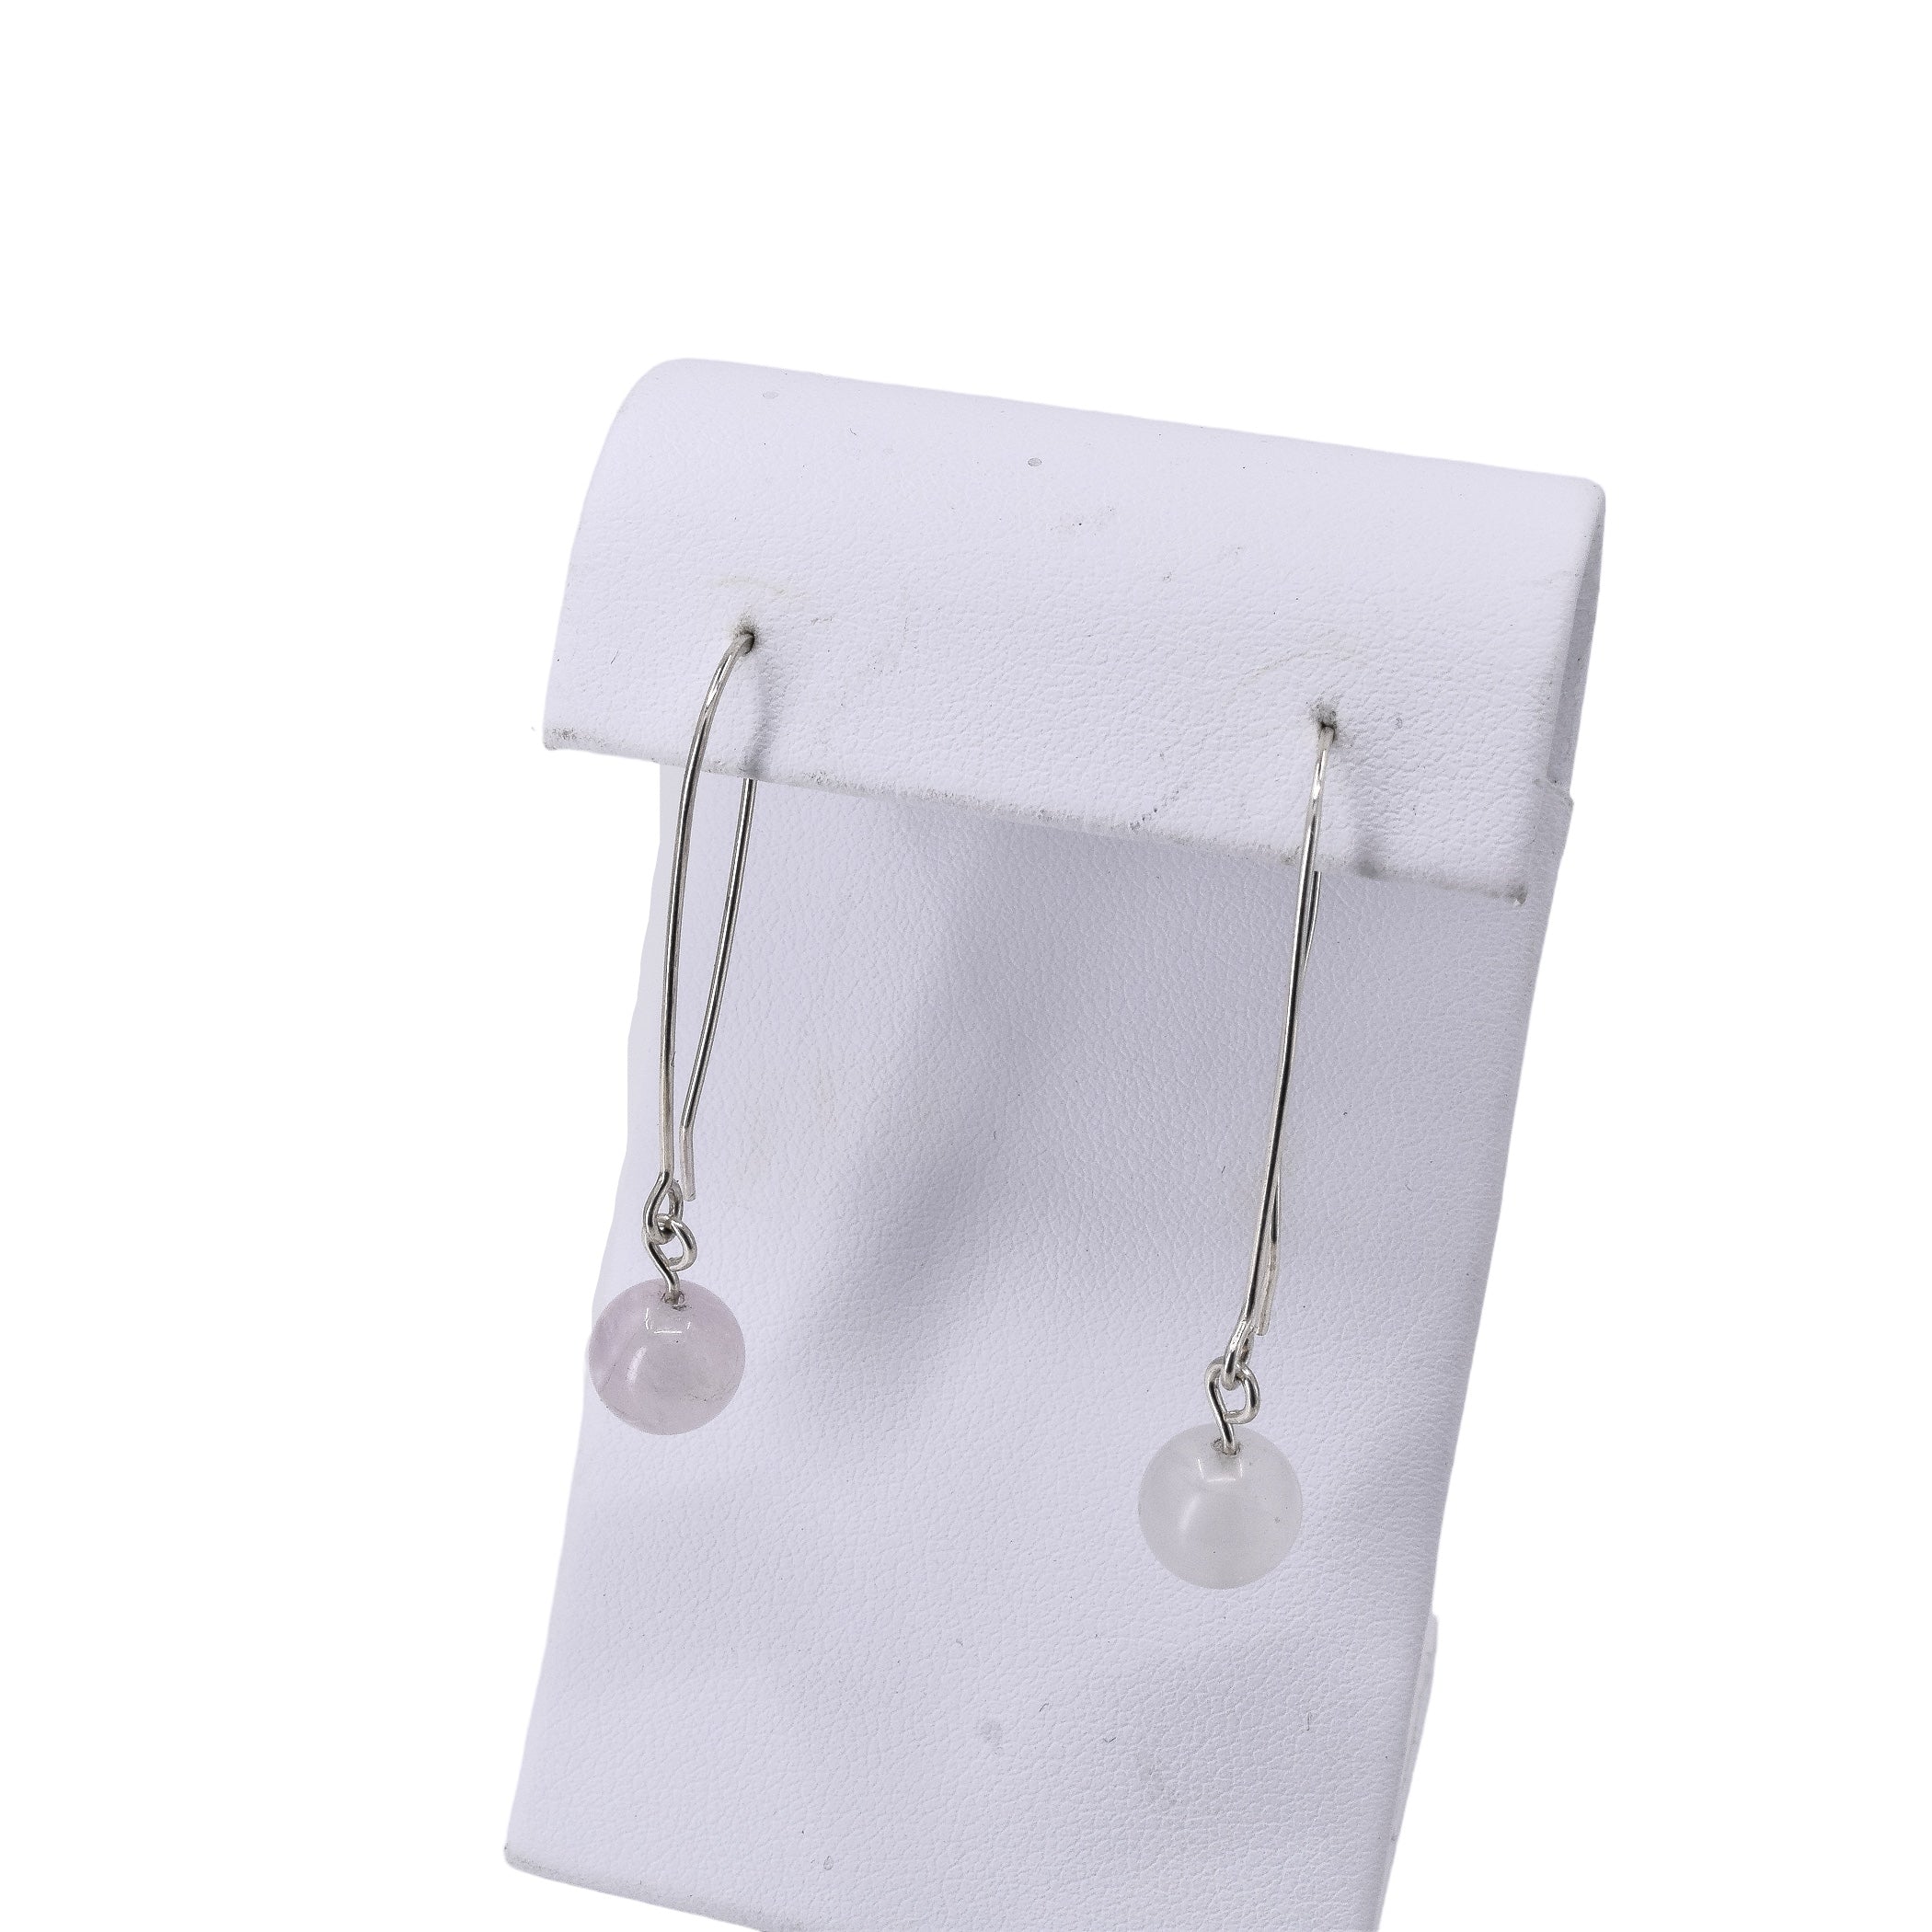 Long dangle sterling silver earrings with an 8mm round morganite bead in a light pink color